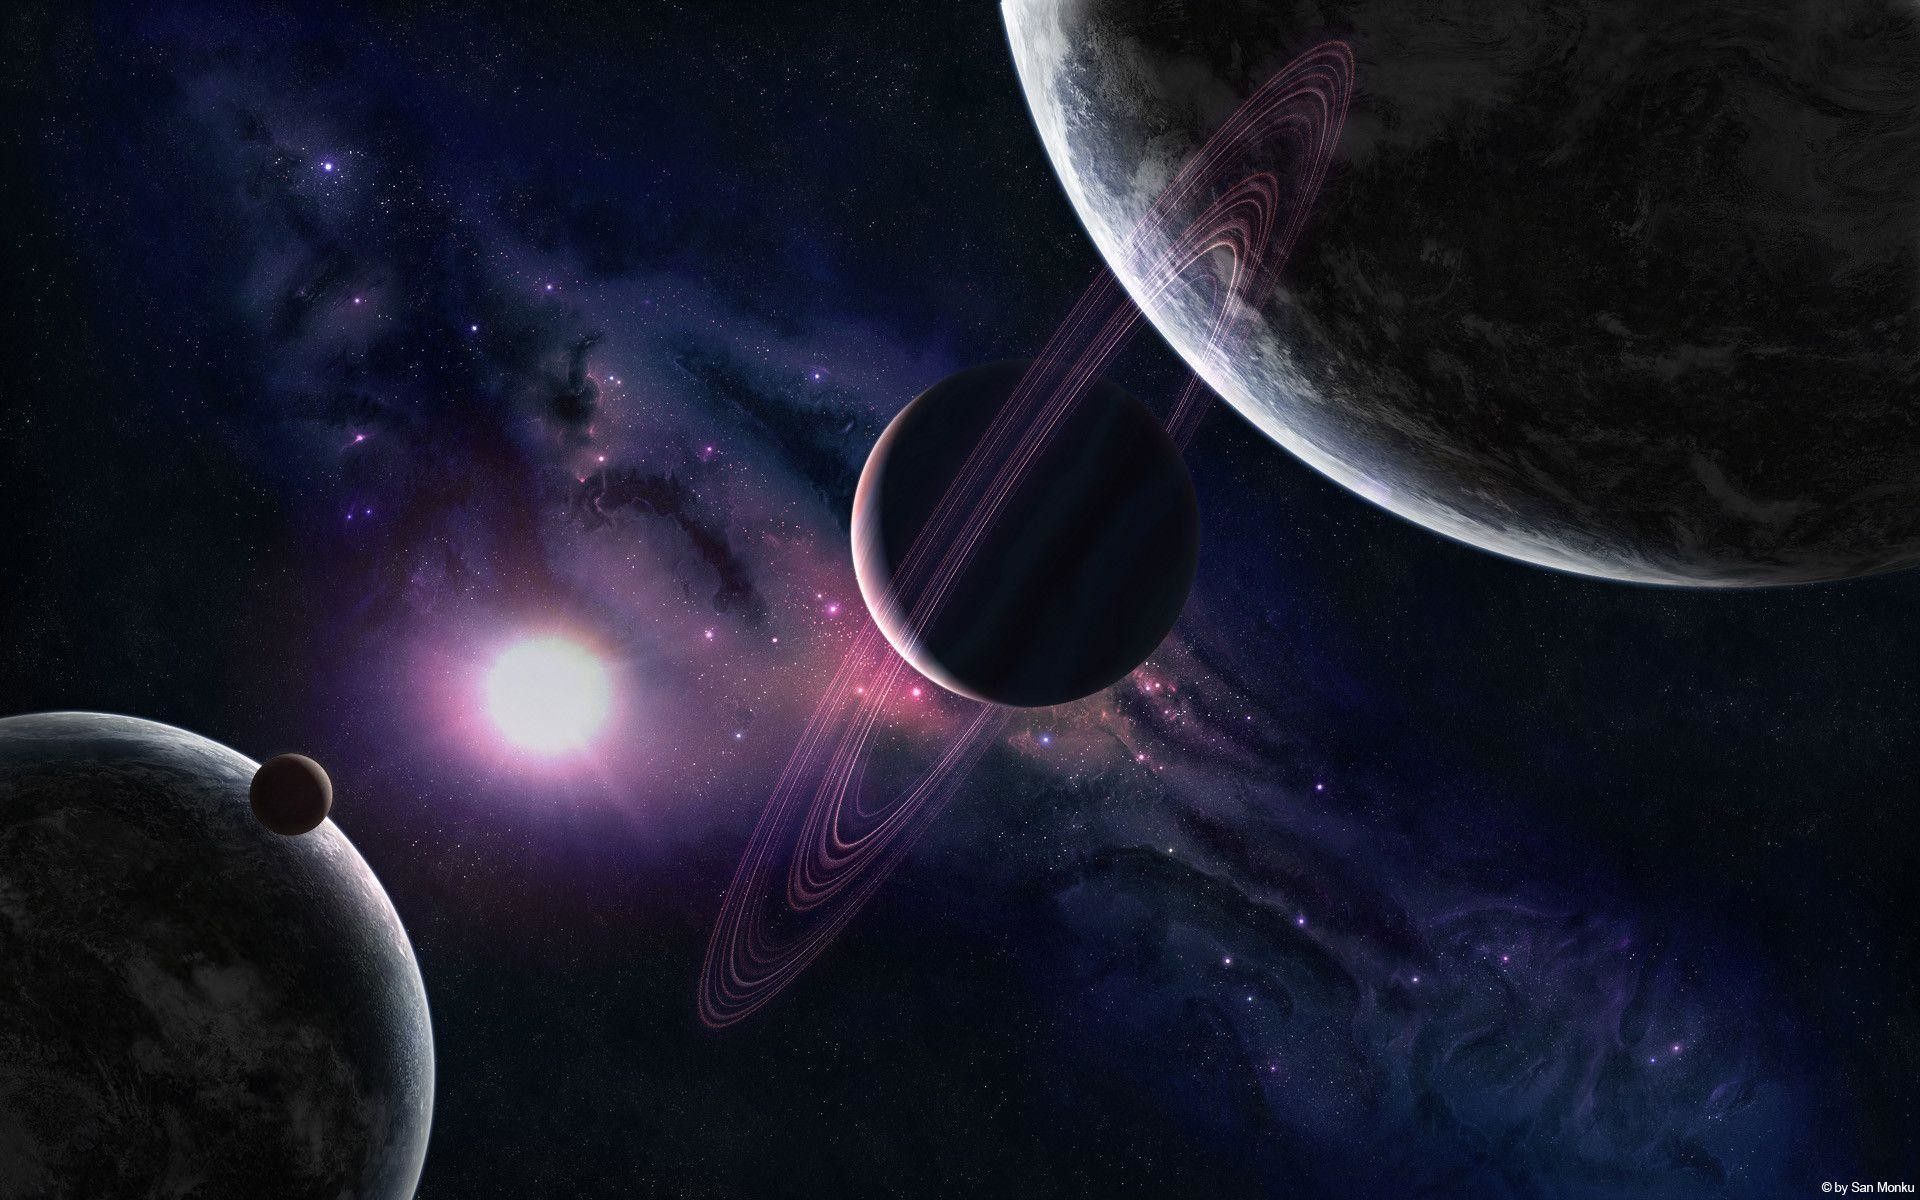 outer space planets wallpaper